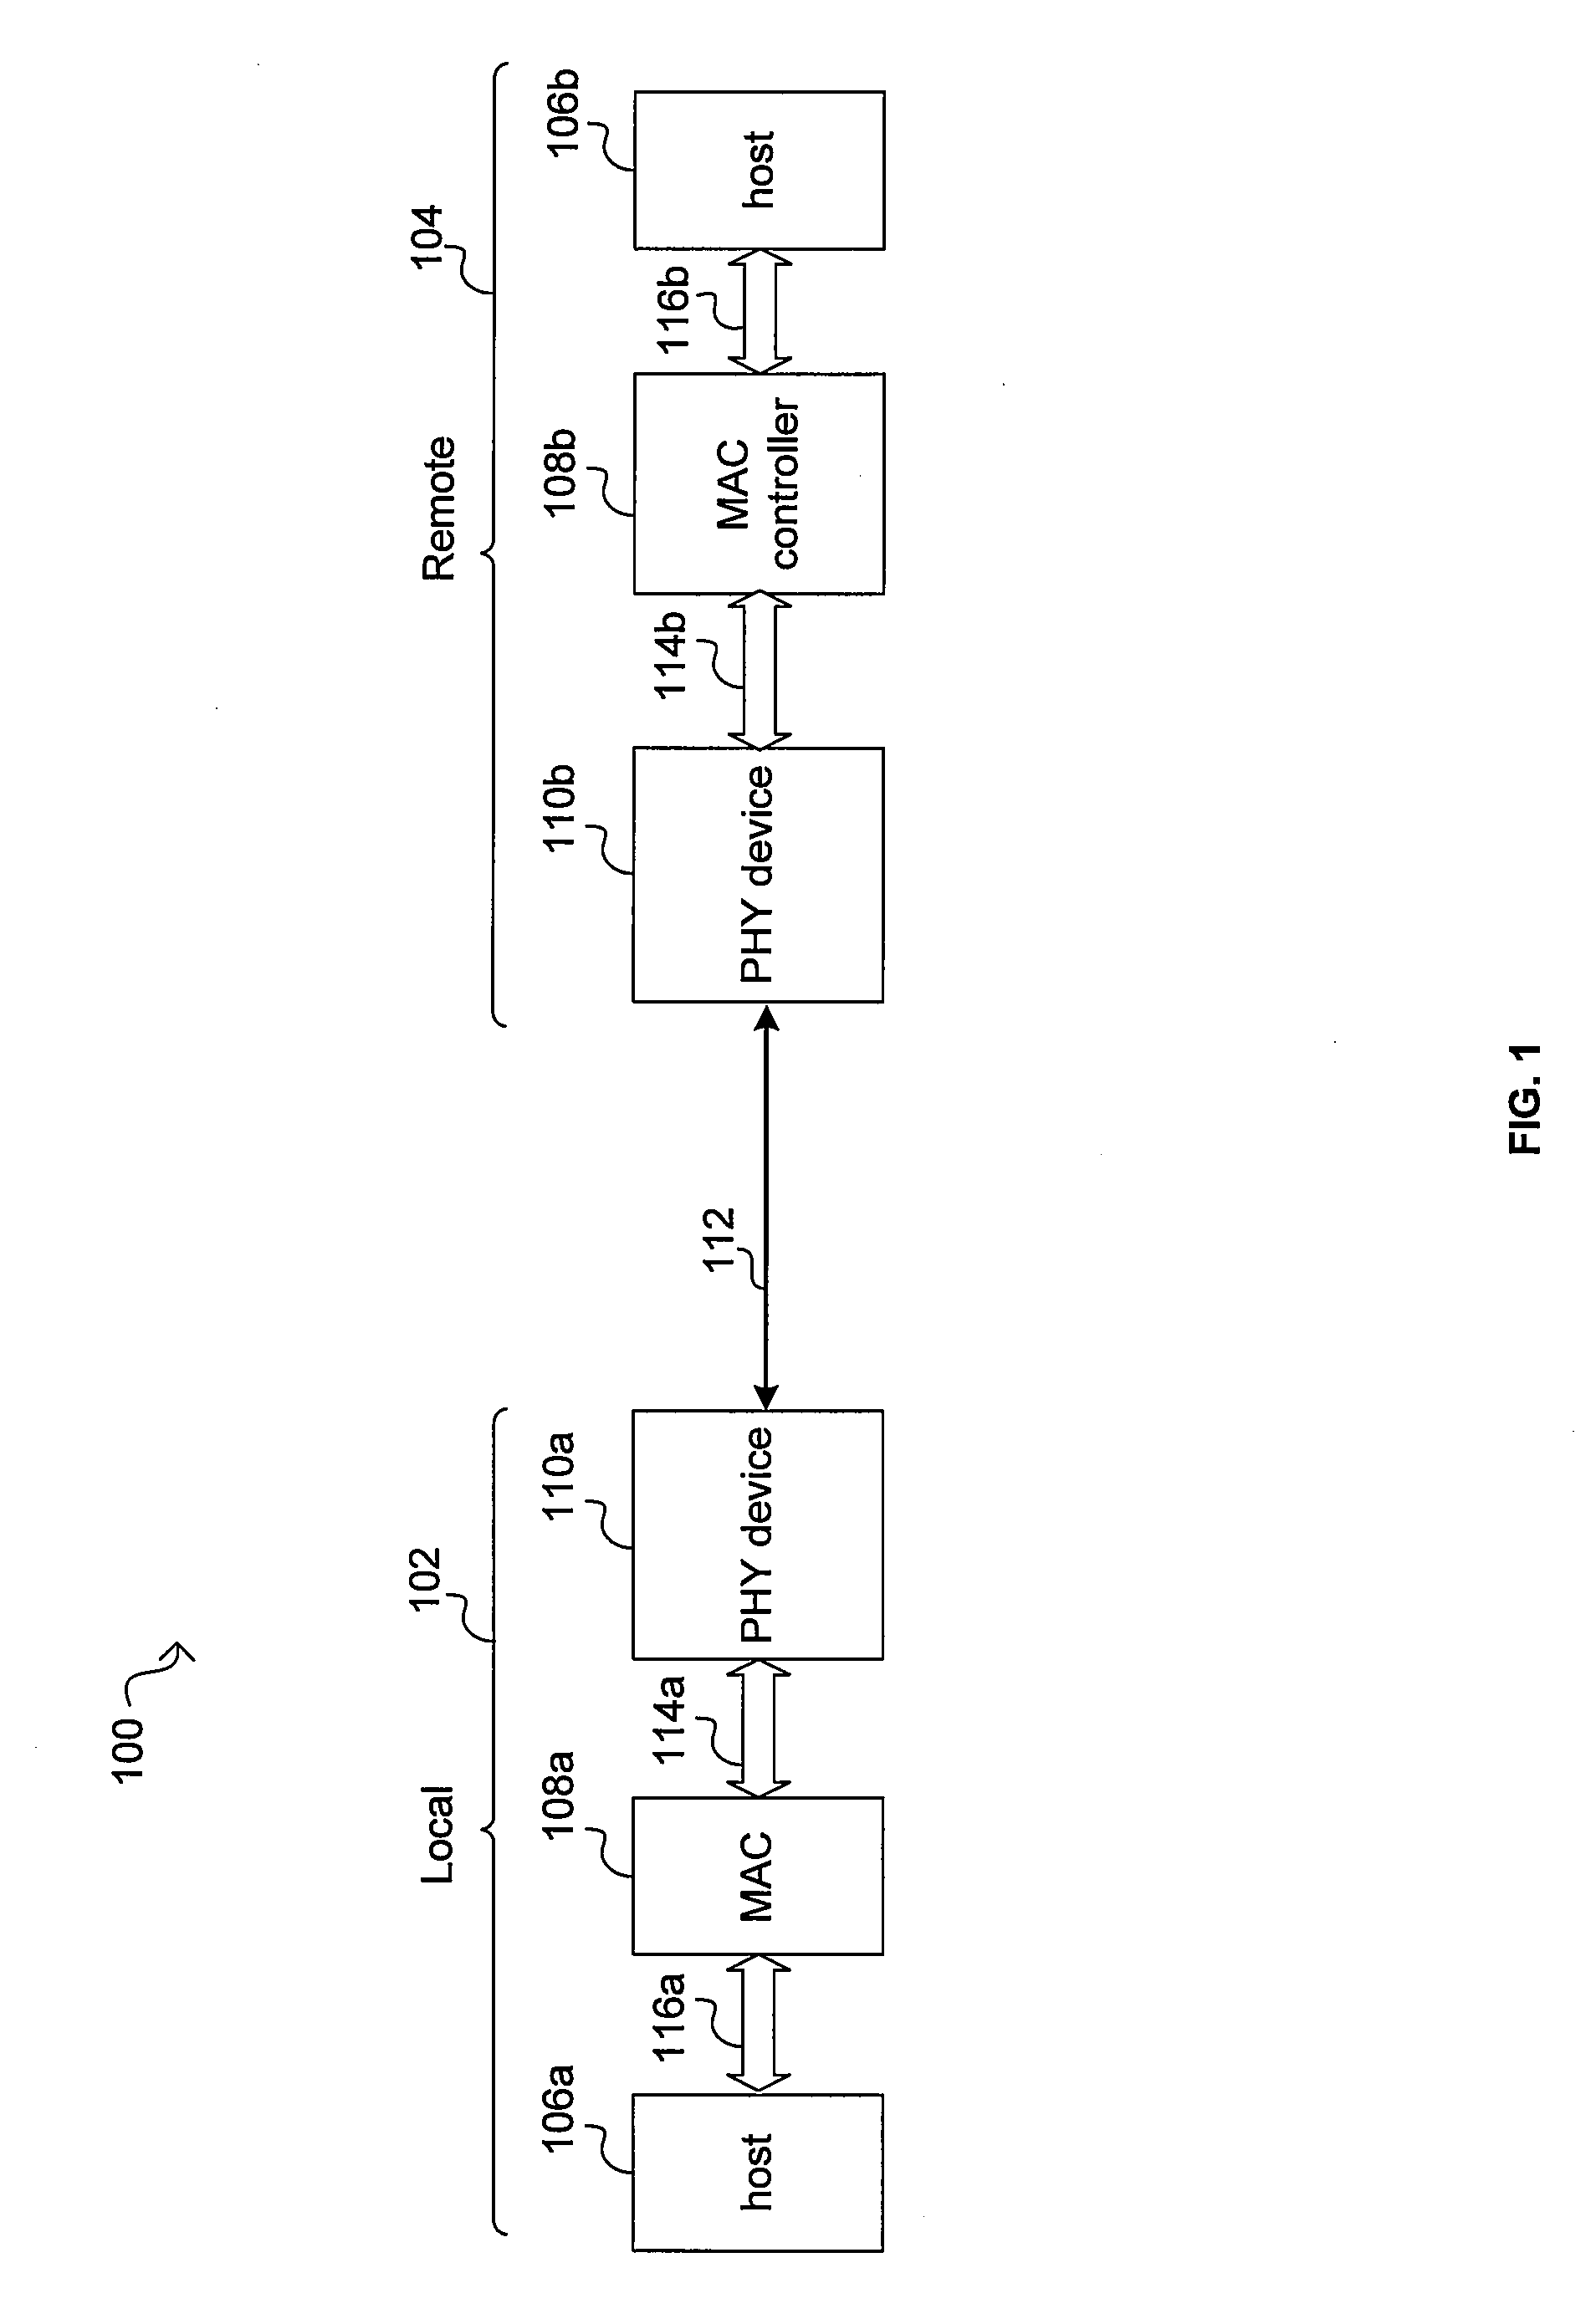 Method and system for reducing transceiver power via a variable symbol rate